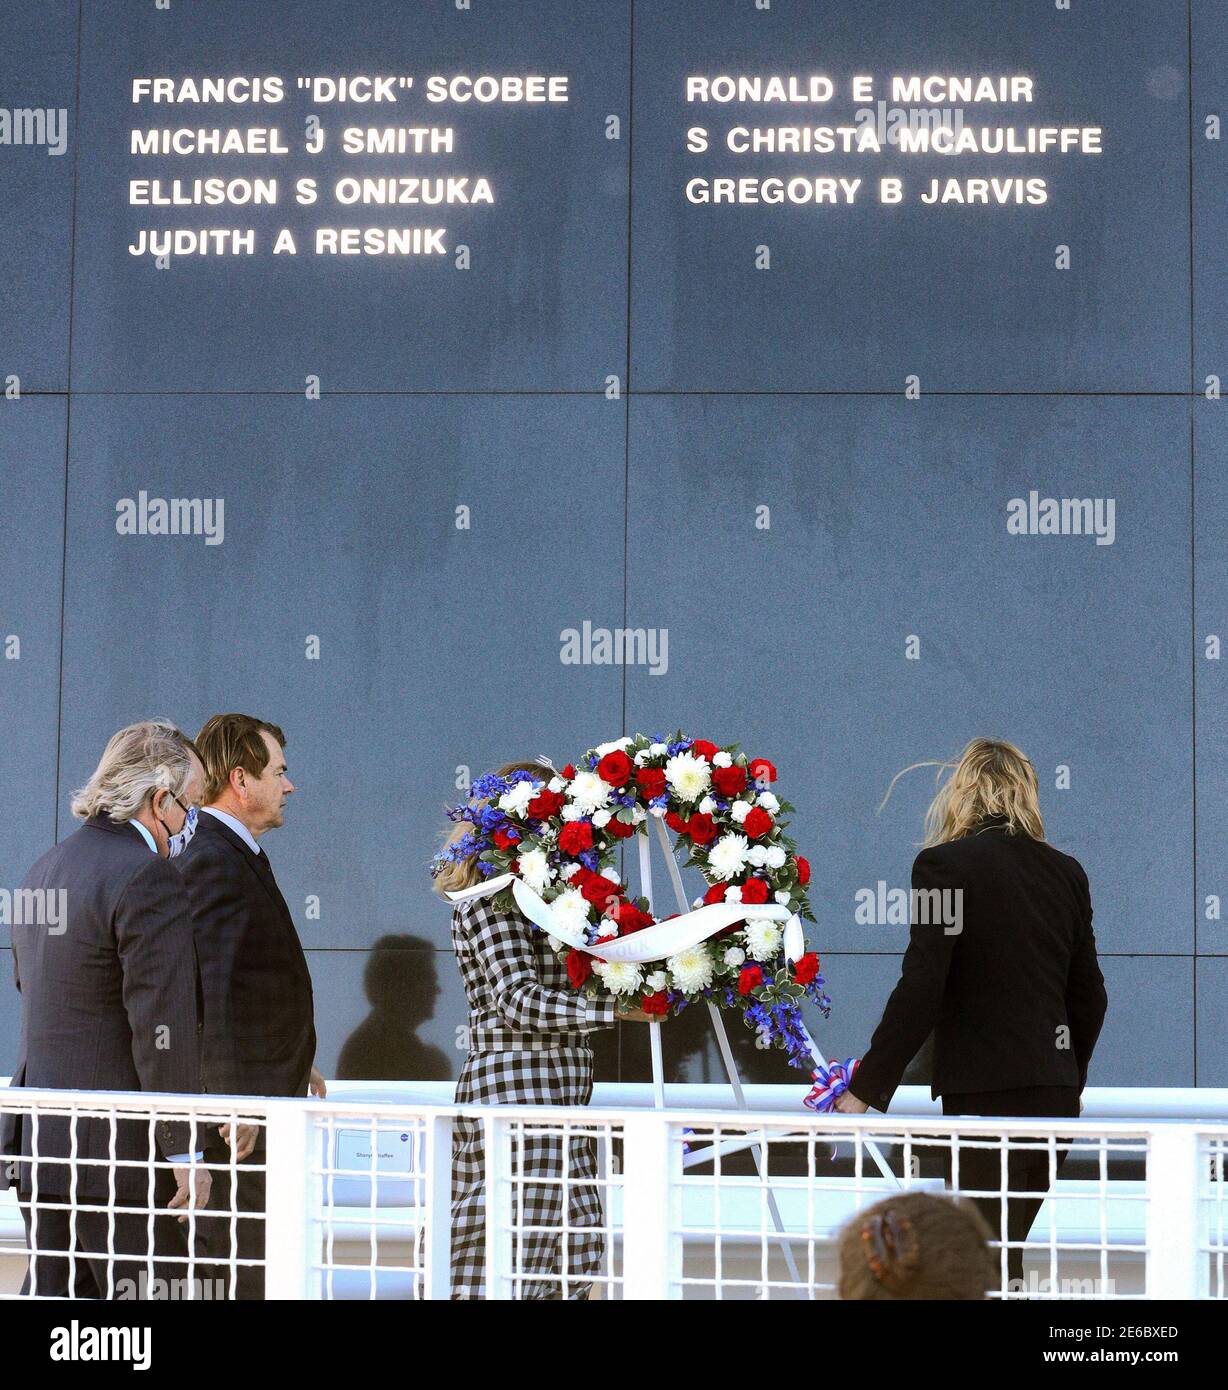 NO FILM, NO VIDEO, NO TV, NO DOCUMENTARY - The sun illuminates the seven names of the astronauts killed in the 1986 Challenger shuttle disaster as a wreath is laid at the base of the Space Mirror Memorial during a 35th anniversary commemoration ceremony at Kennedy Space Center, Florida on Thursday, January 28, 2021. Photo by Joe Burbank/Orlando Sentinel/TNS/ABACAPRESS.COM Stock Photo